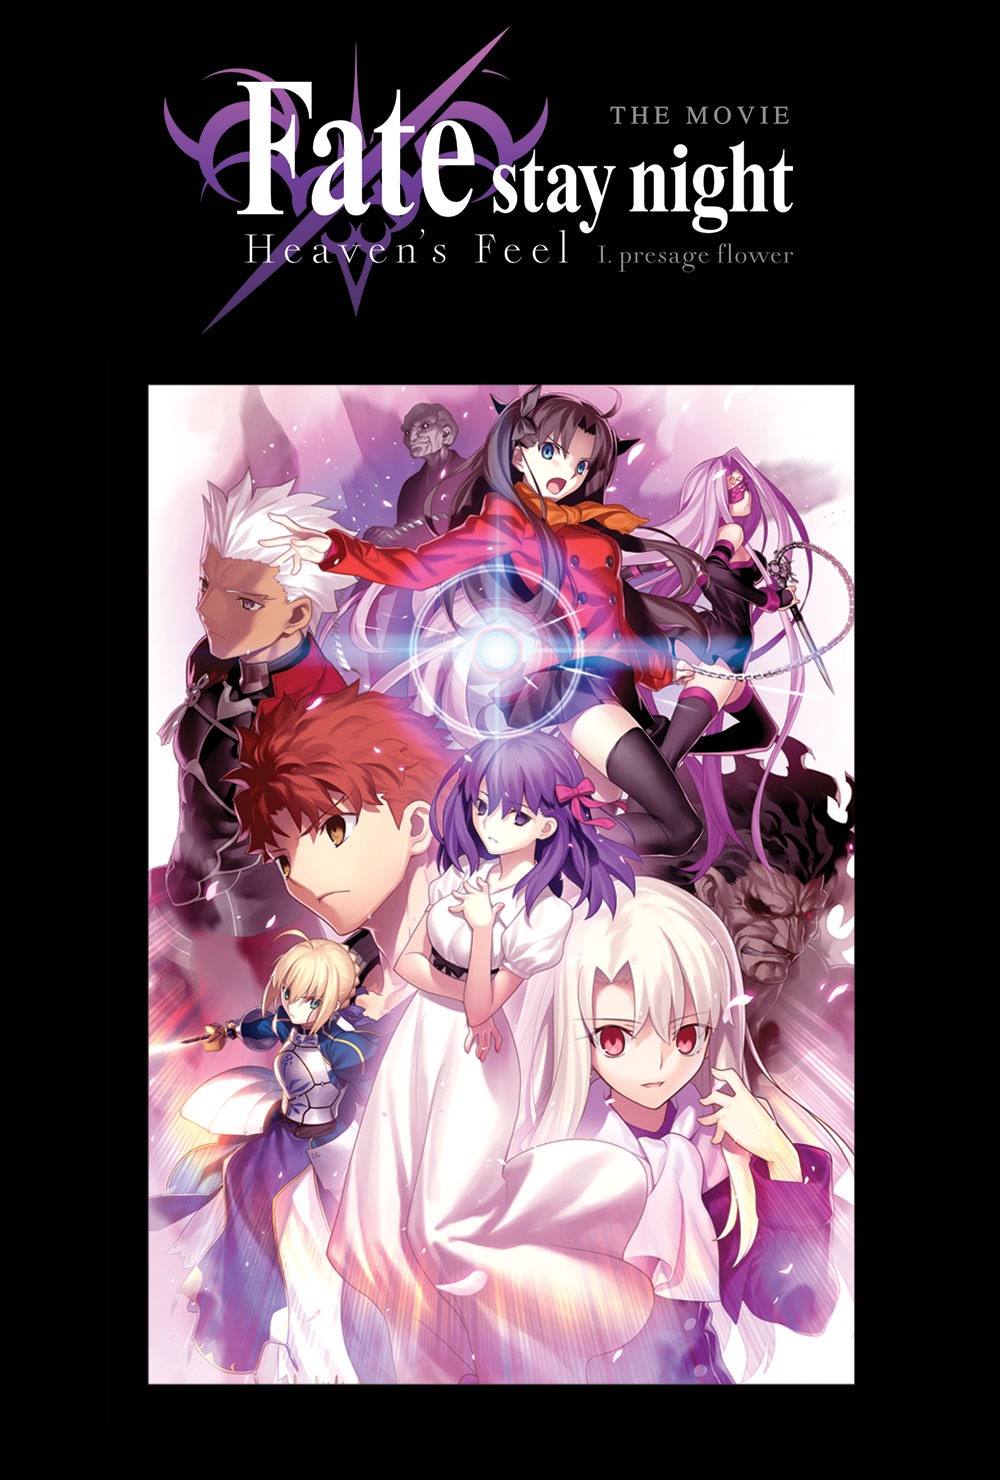 Popular Fate Anime Series Hits the Big Screen for World Premiere of New  English Dub Feature in US Cinemas for Two Nights This June  Markets  Insider